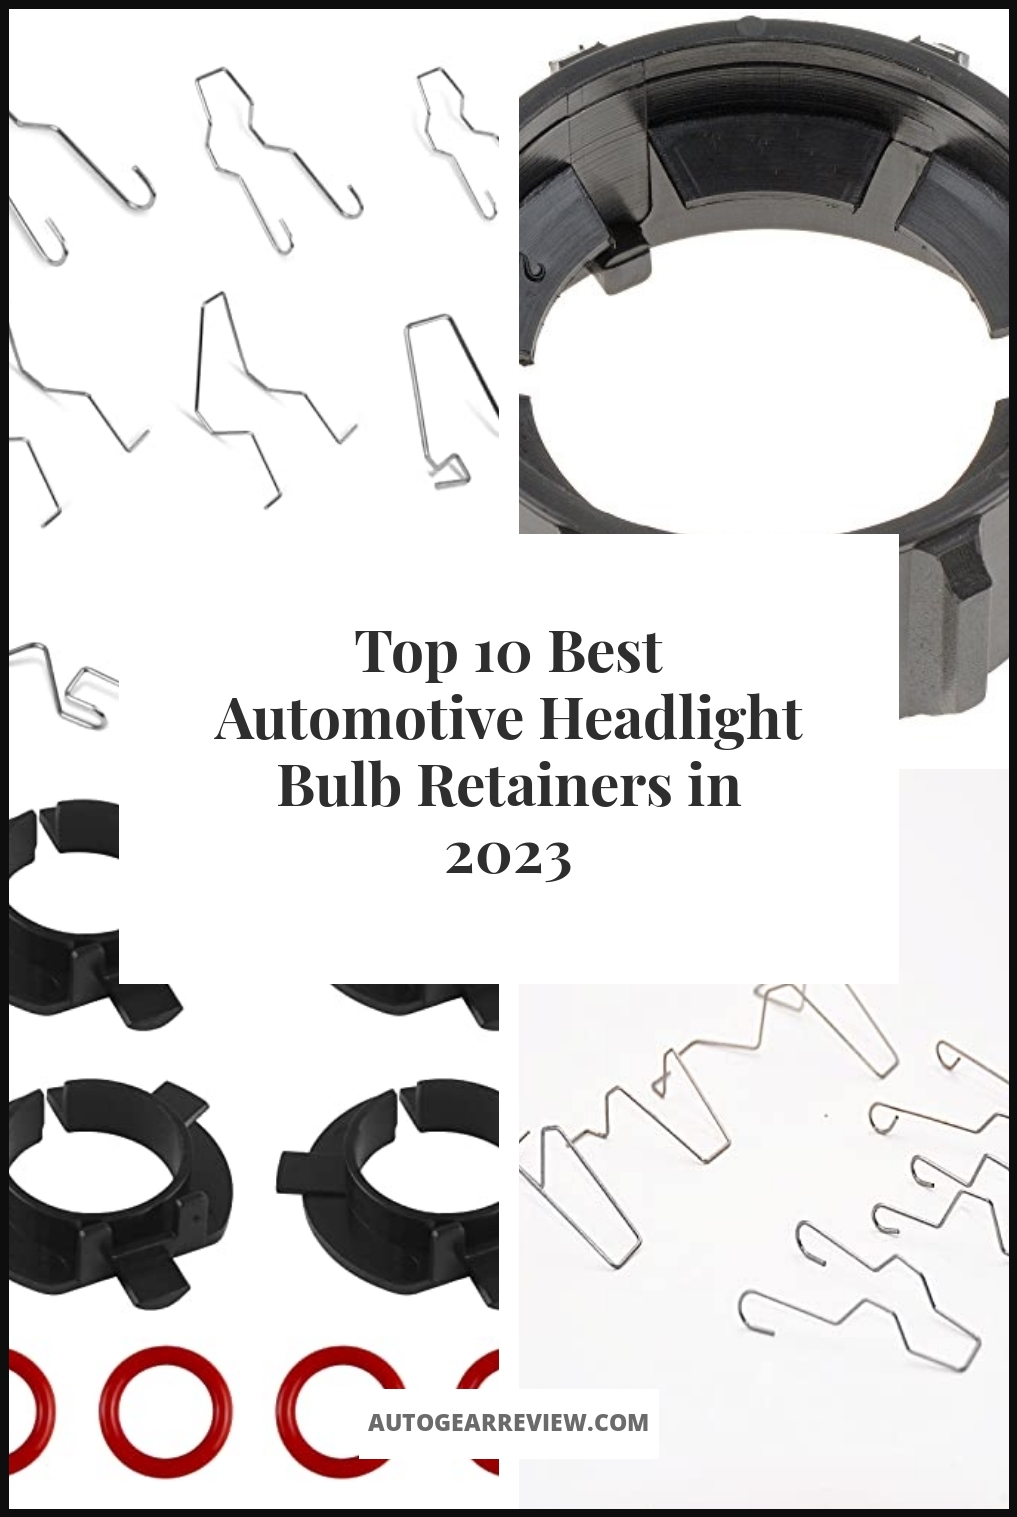 Best Automotive Headlight Bulb Retainers - Buying Guide